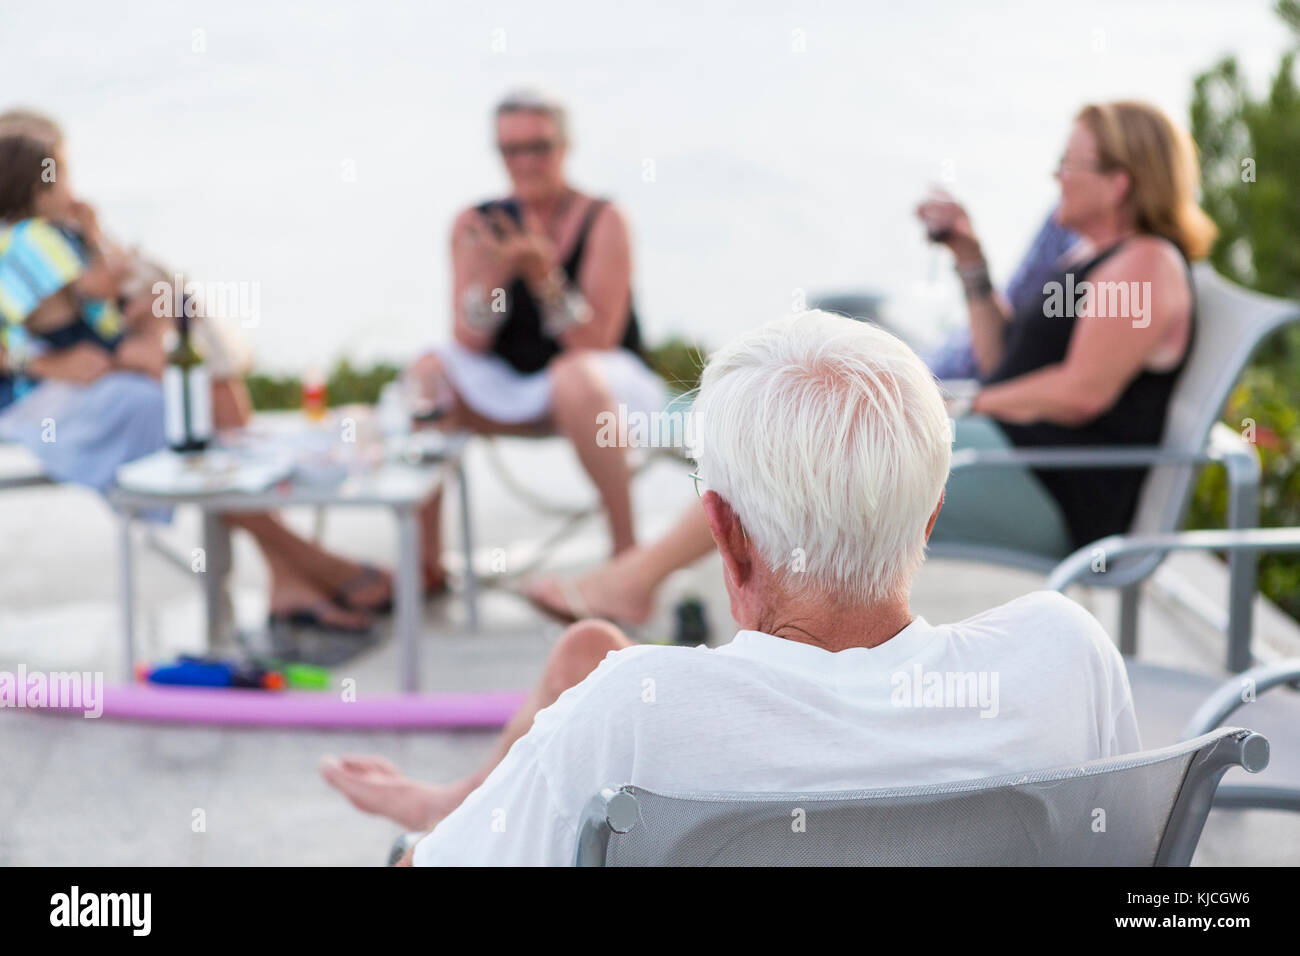 Caucasian people relaxing on patio Stock Photo